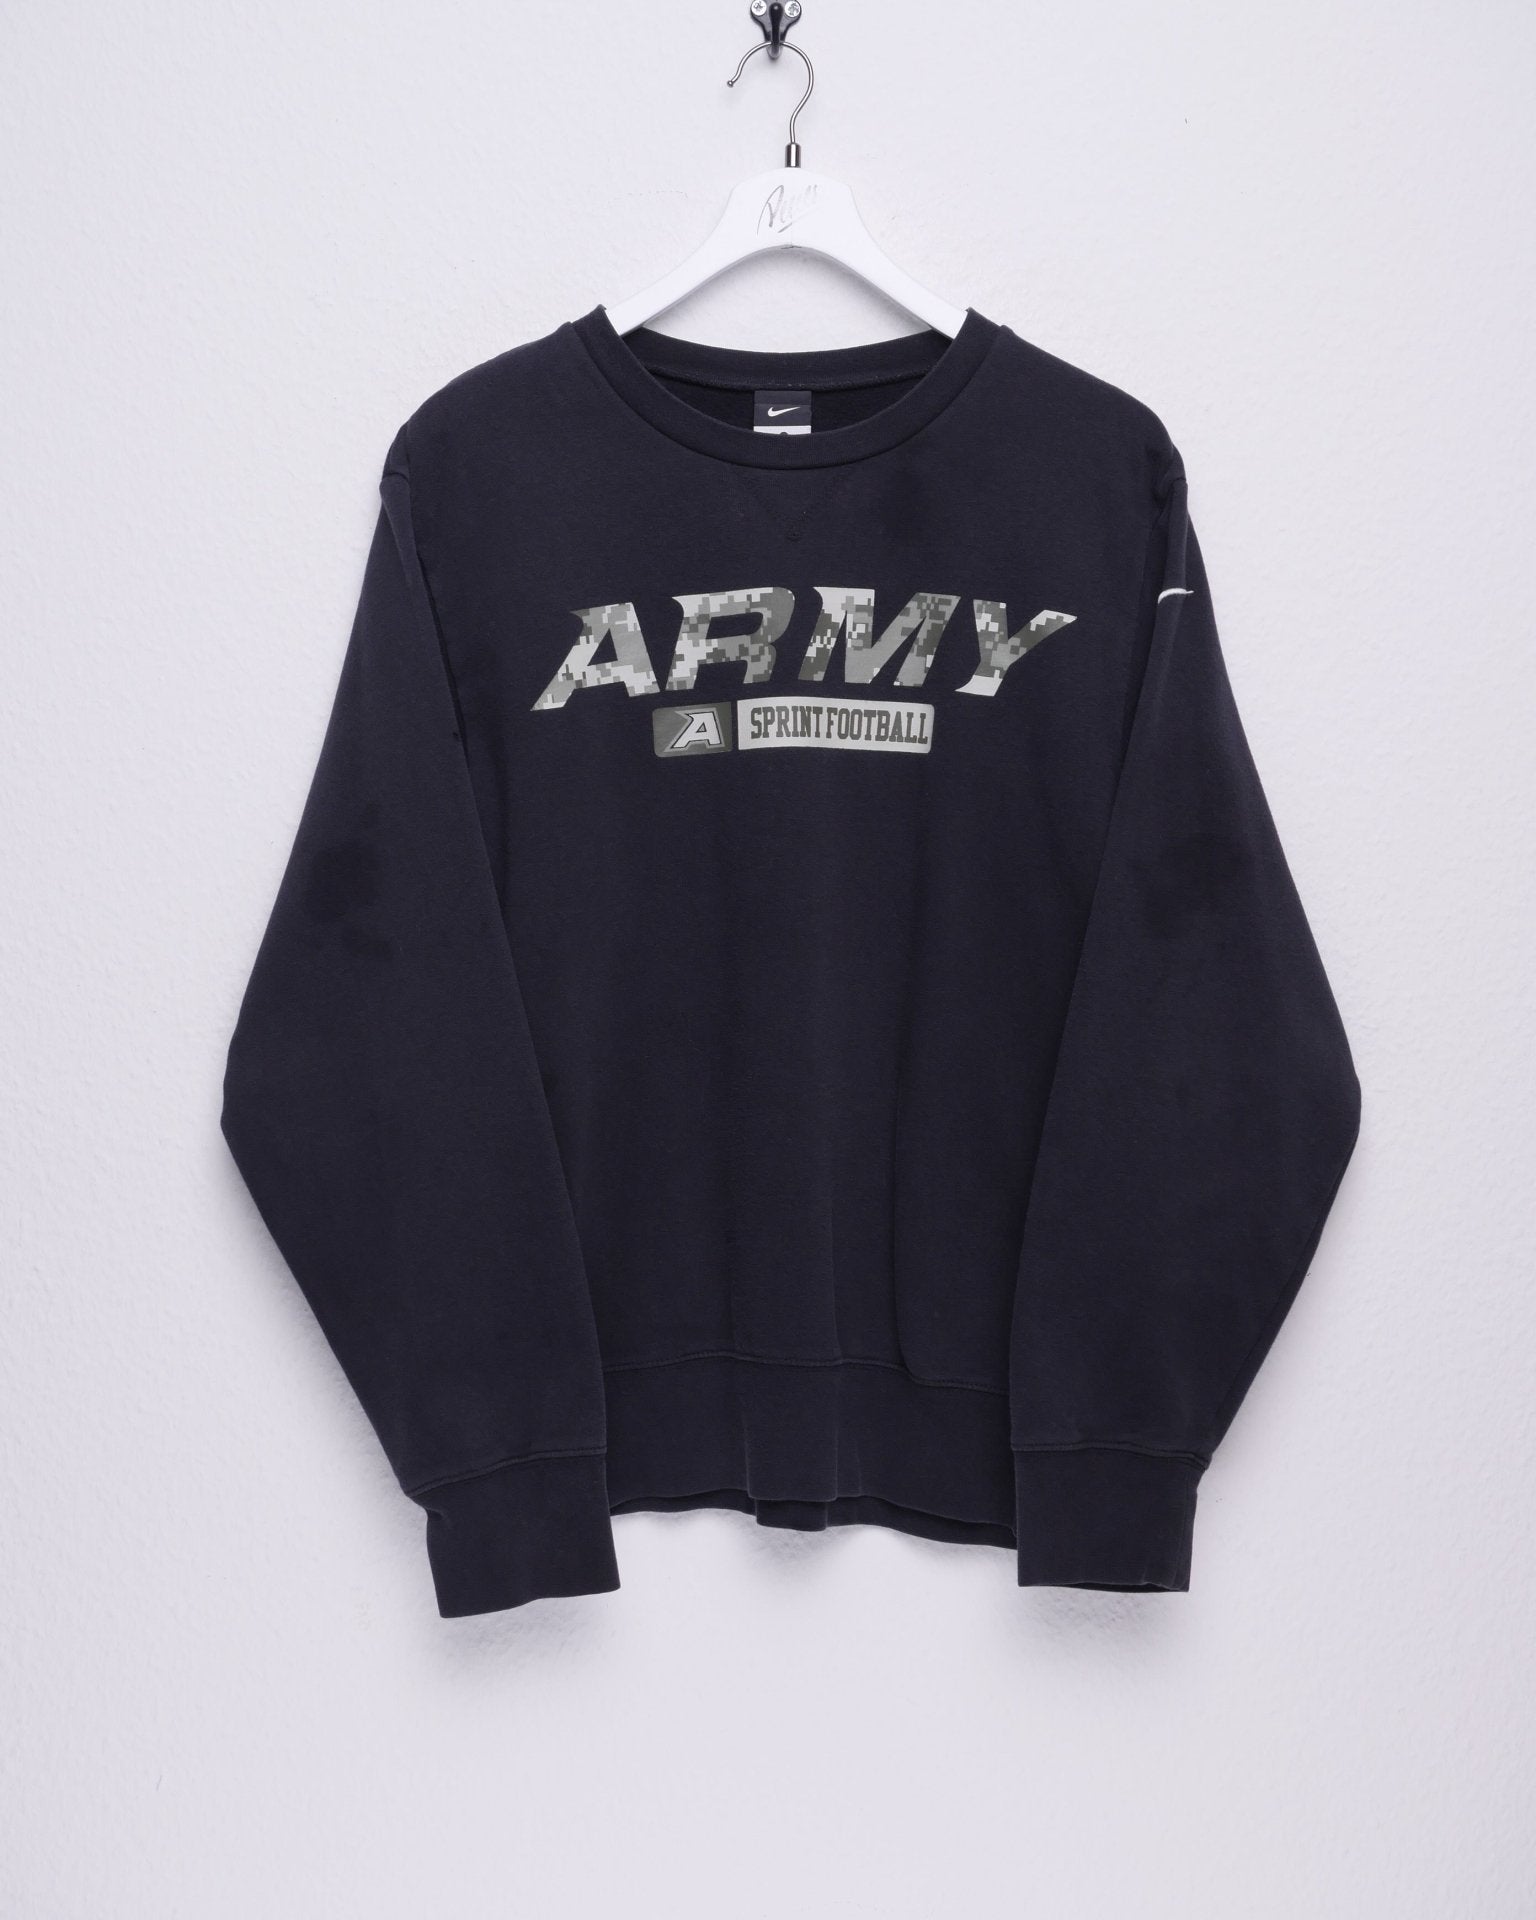 Nike Army Sprint Football embroidered Swosh Sweater - Peeces